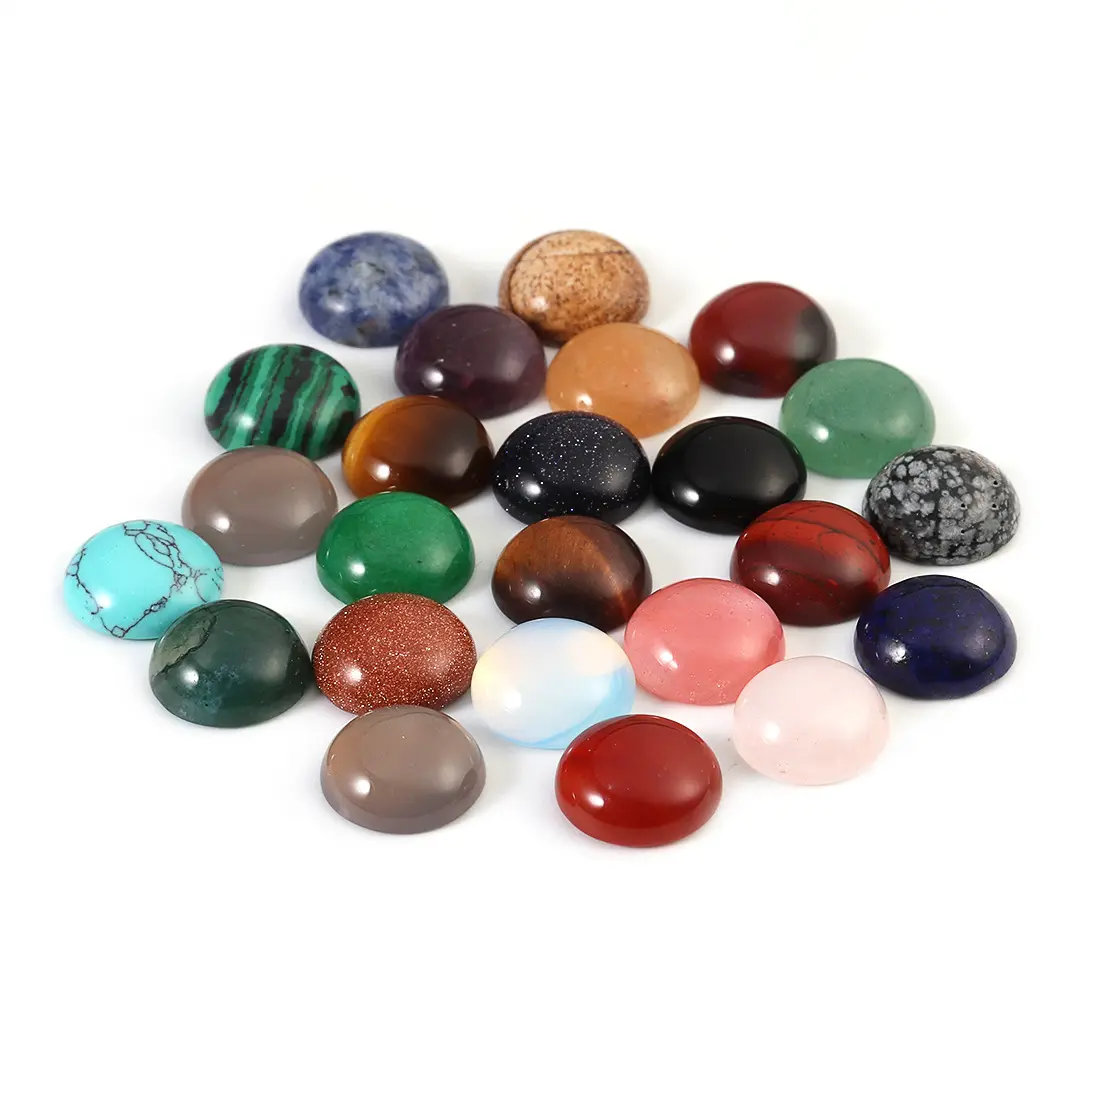 PANGEM natural gemstone and semi precious stone round calibrated cabochons 6-25 mm for jewelry setting and mounting 50 options